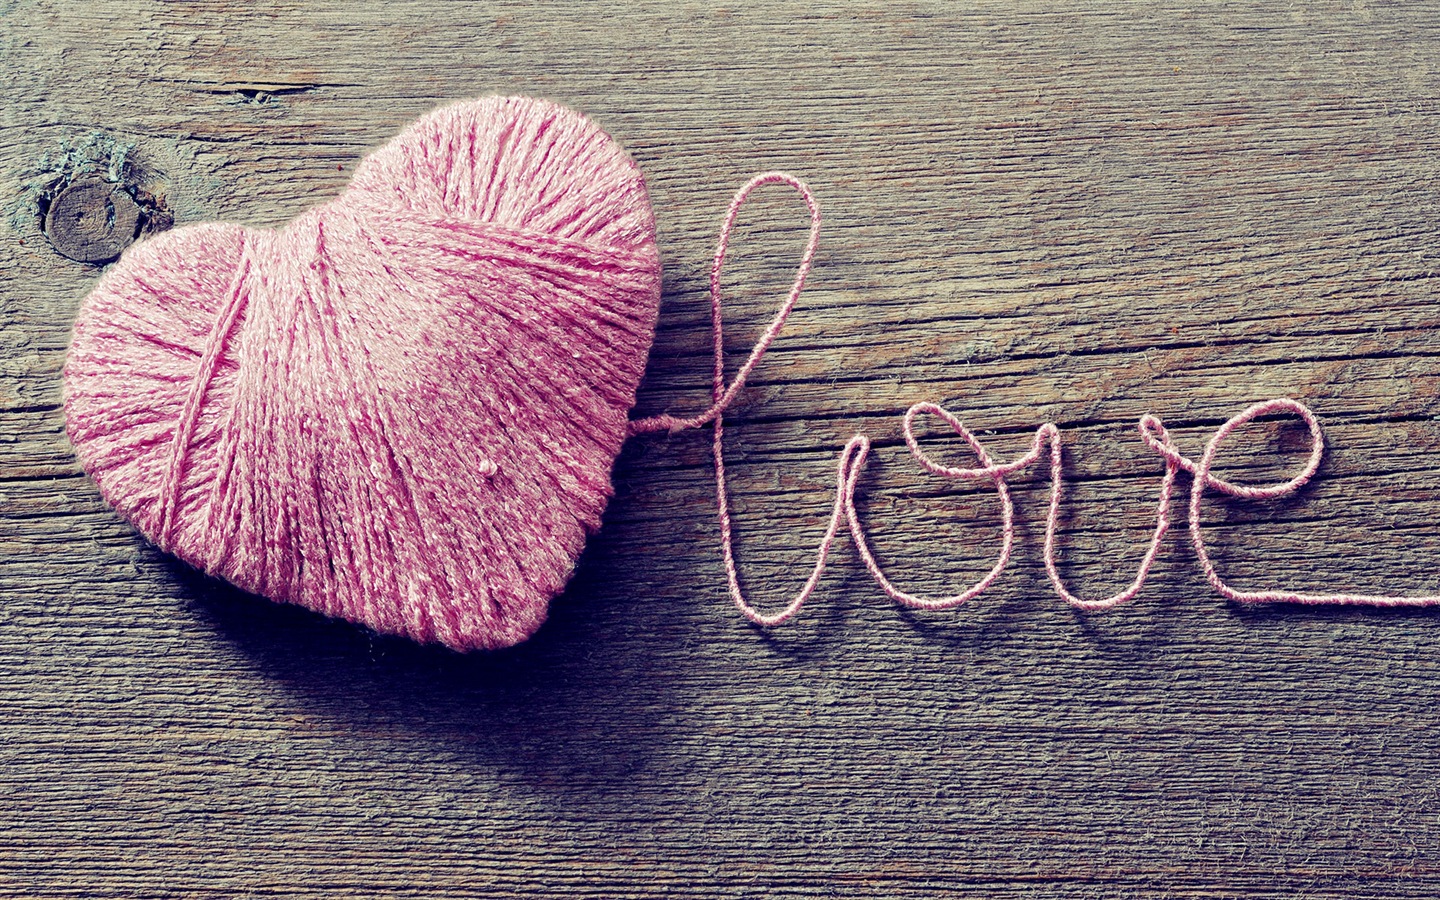 The theme of love, creative heart-shaped HD wallpapers #10 - 1440x900